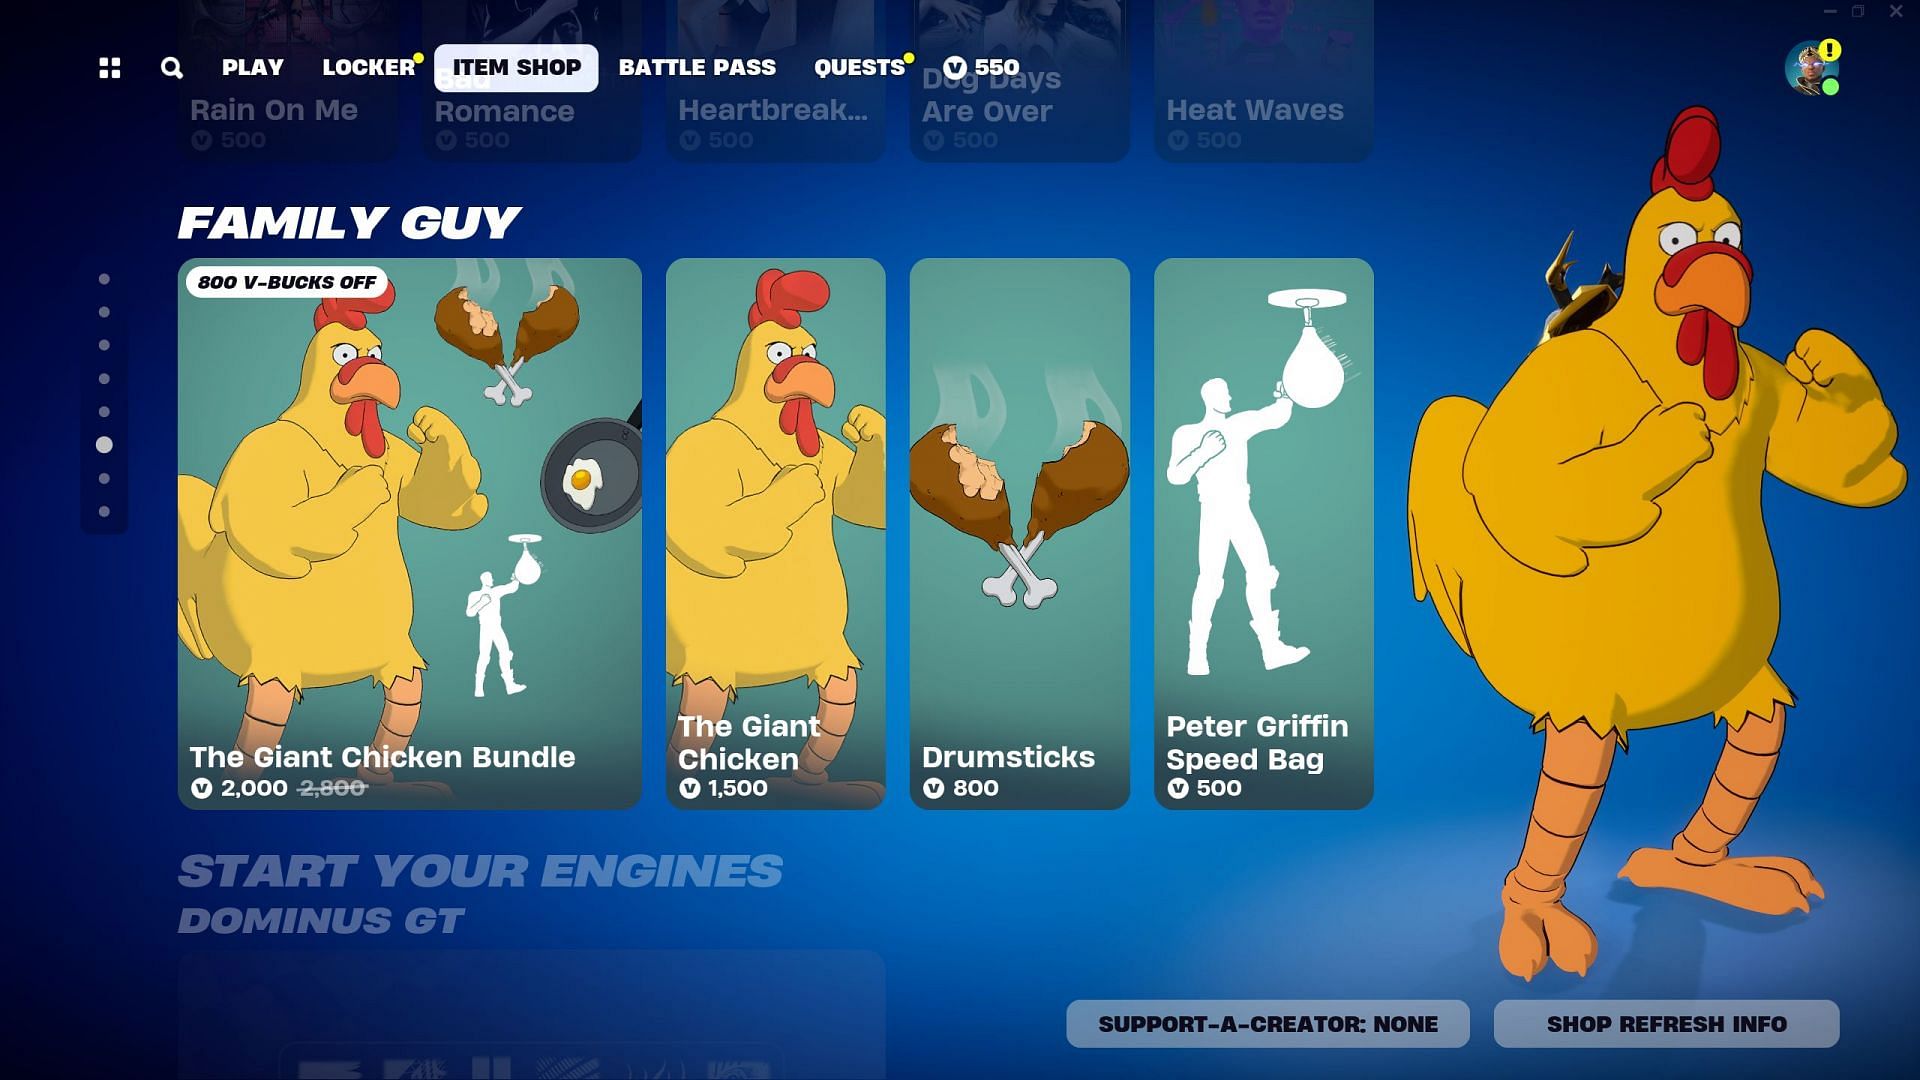 The Giant Chicken Skin is currently listed in the Item Shop. (Image via Epic Games/Fortnite)